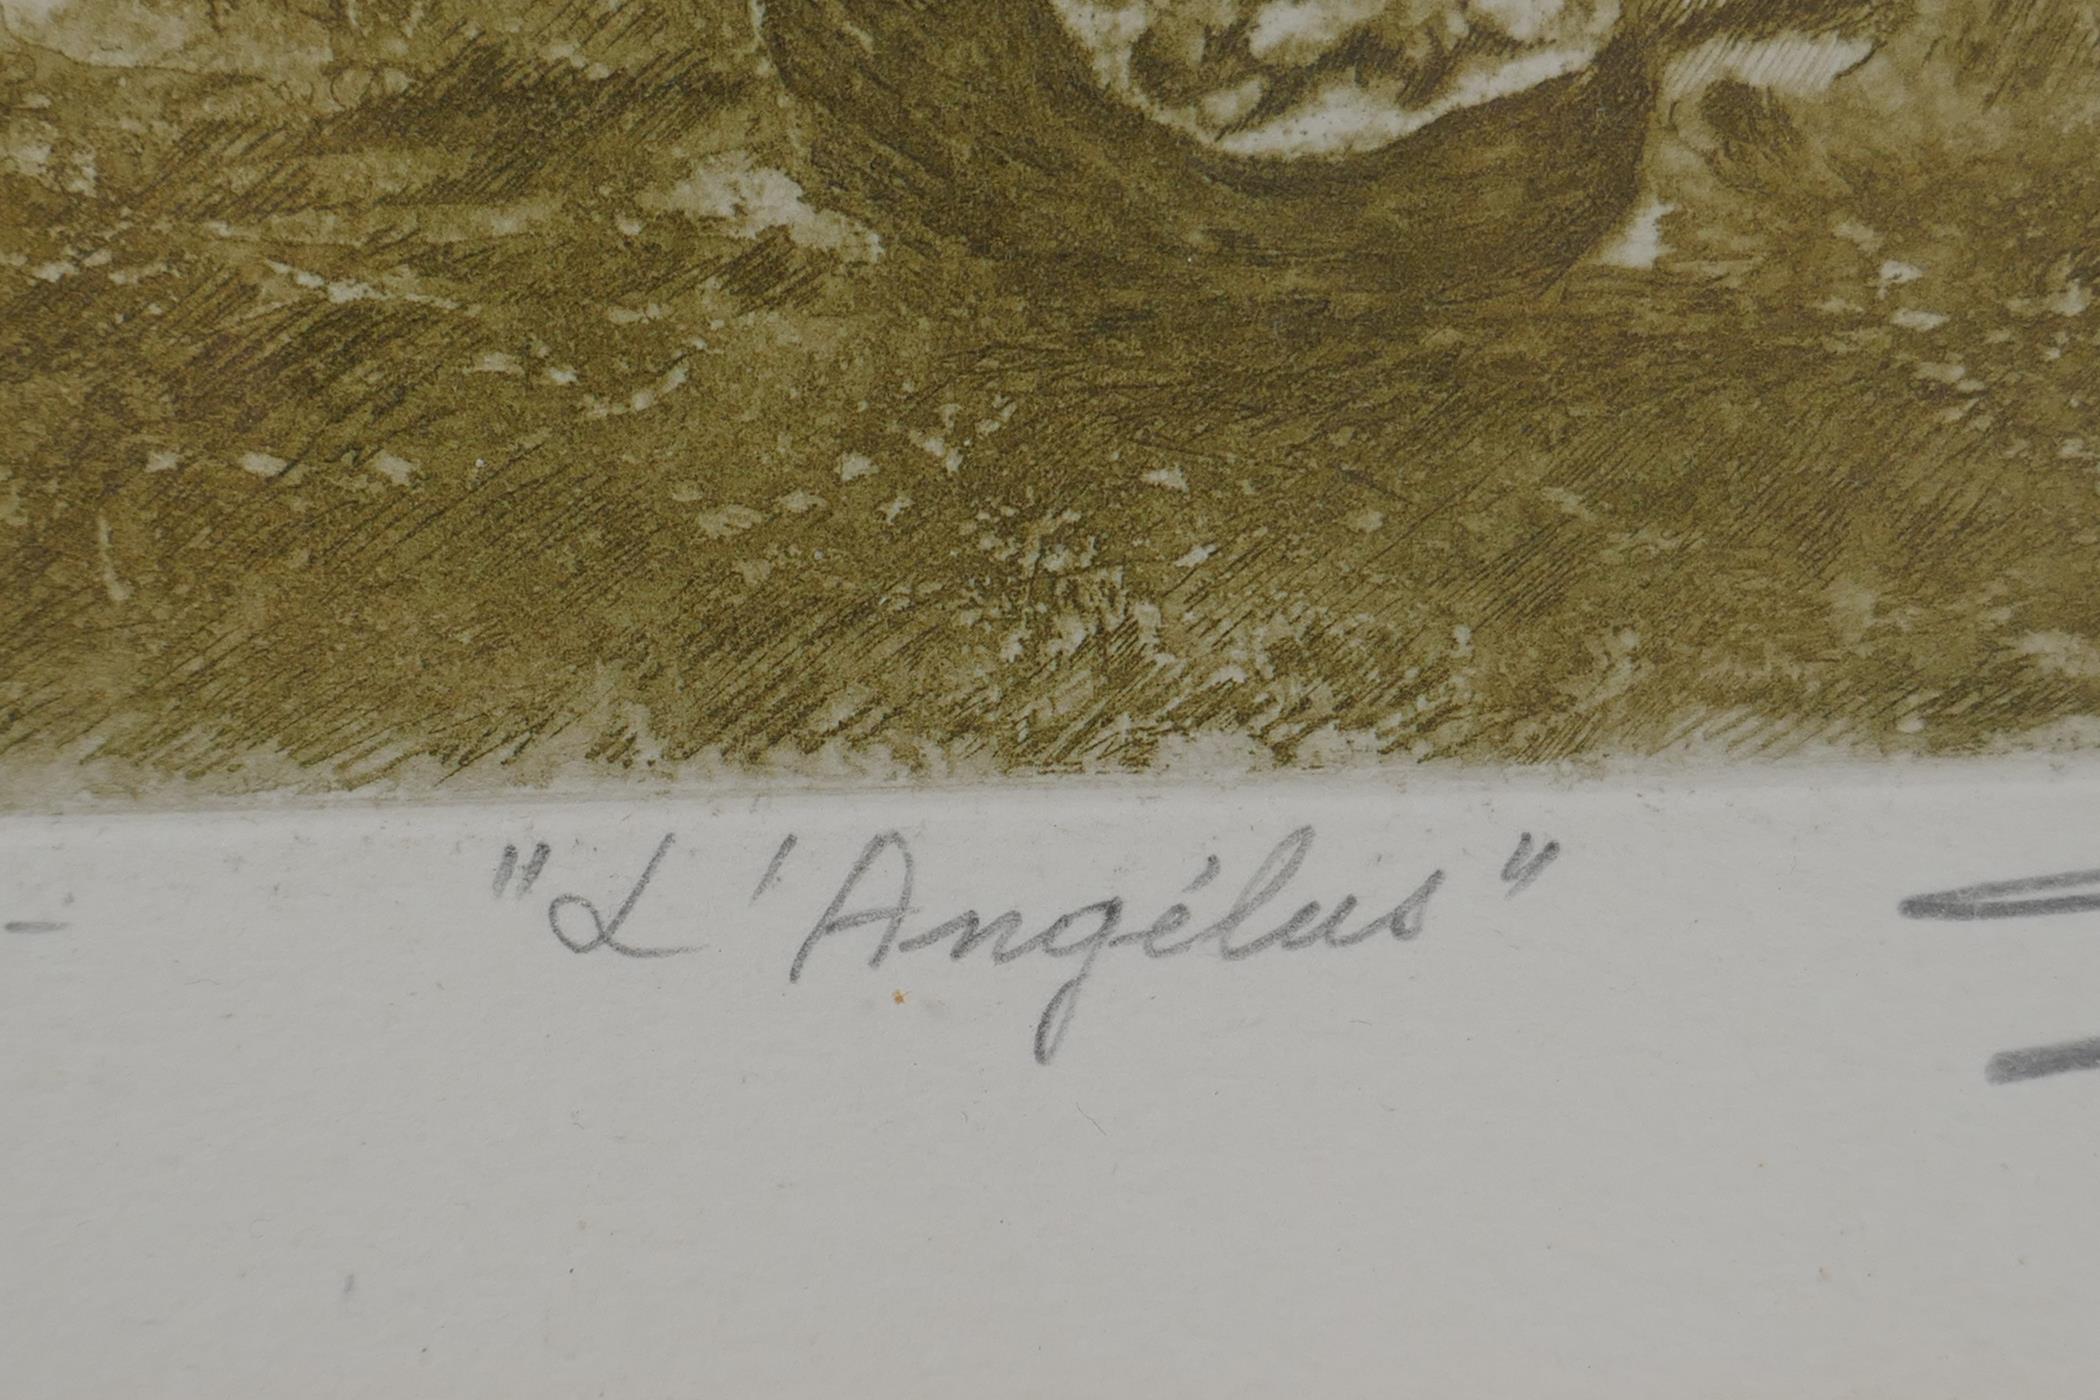 After Jean-Francois Millet, (French, 1814-1875), L'Angelus (The Angelus), engraving, indistinctly - Image 4 of 6